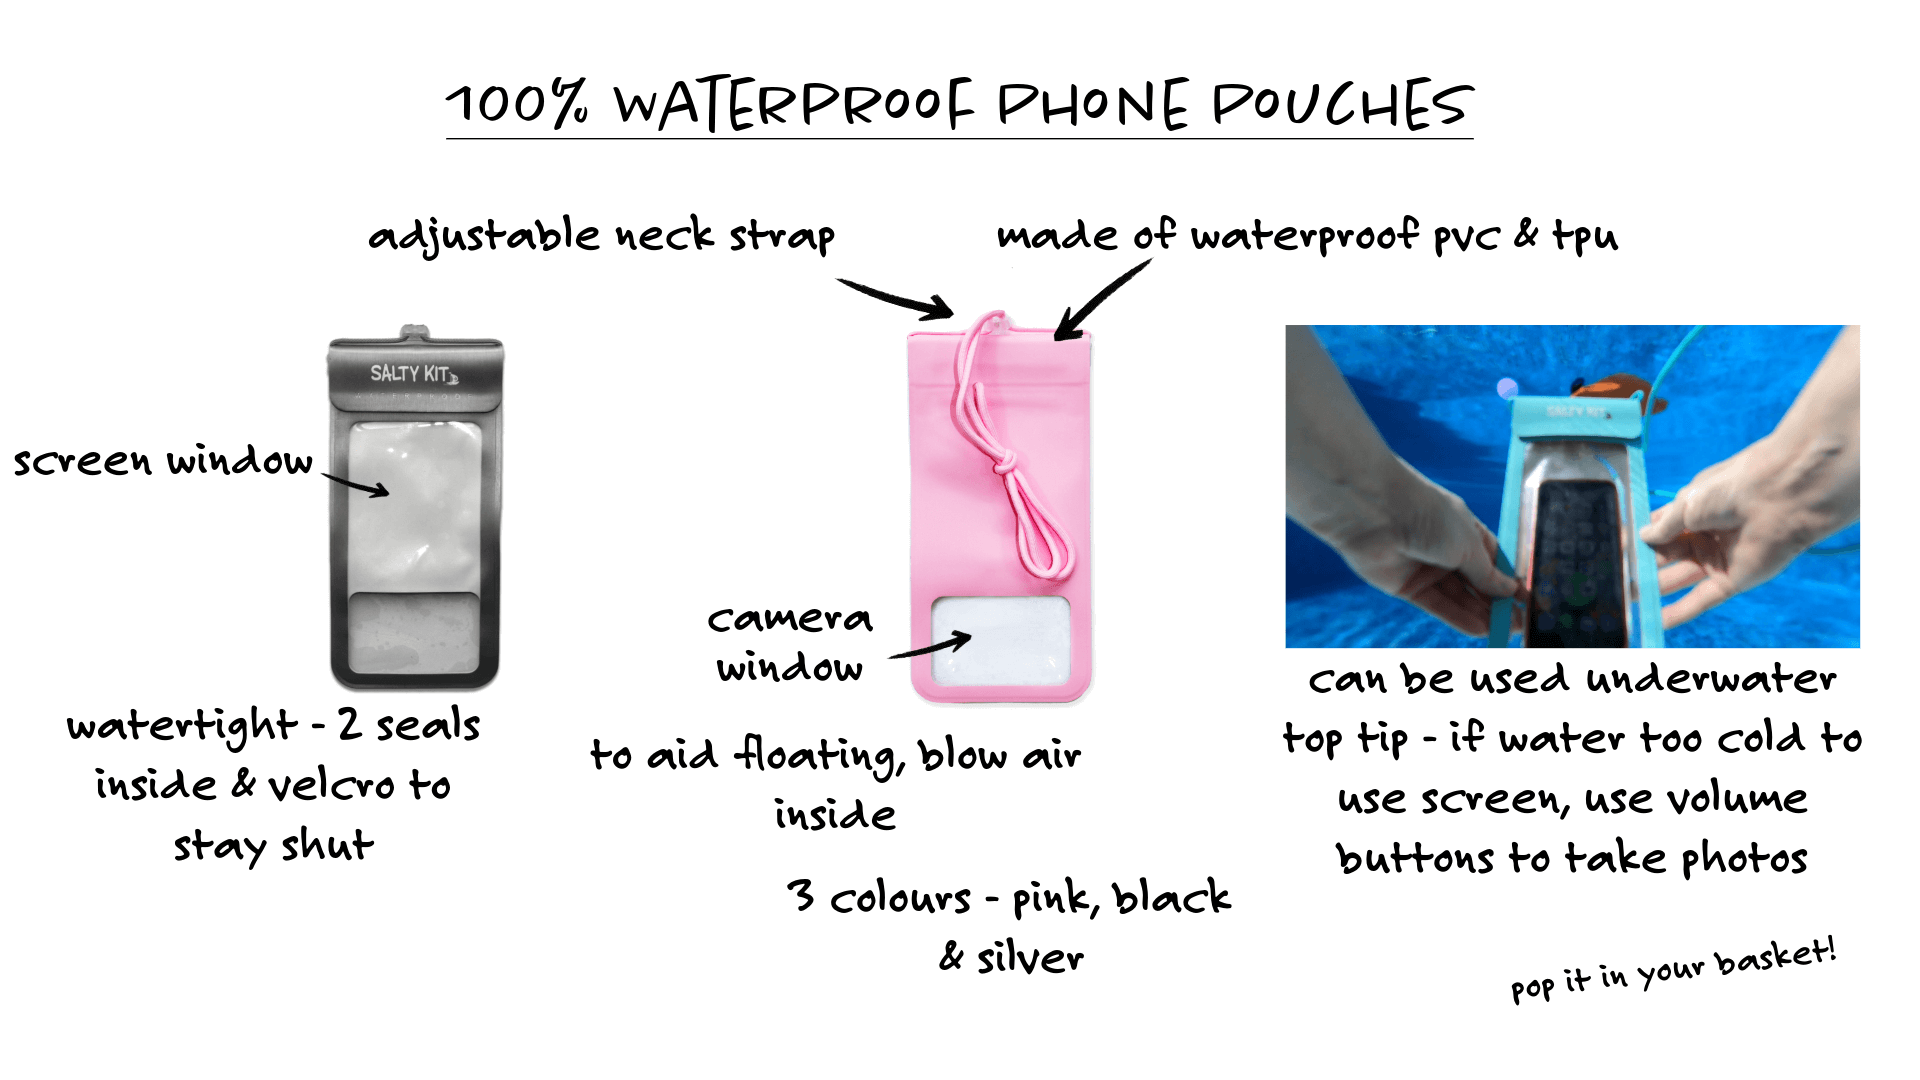 all the USPs for the waterproof phone pouches such as it has a screen window, its watertight with 2 seals inside and velcro to stay shut, a camera window, to aid floating just blow air inside, adjustable neck strap, made of waterproof pvc and tpu and can be used underwater, top tip if the water is too cold to use the screen, use your volume buttons to take photos so put it in your basket!